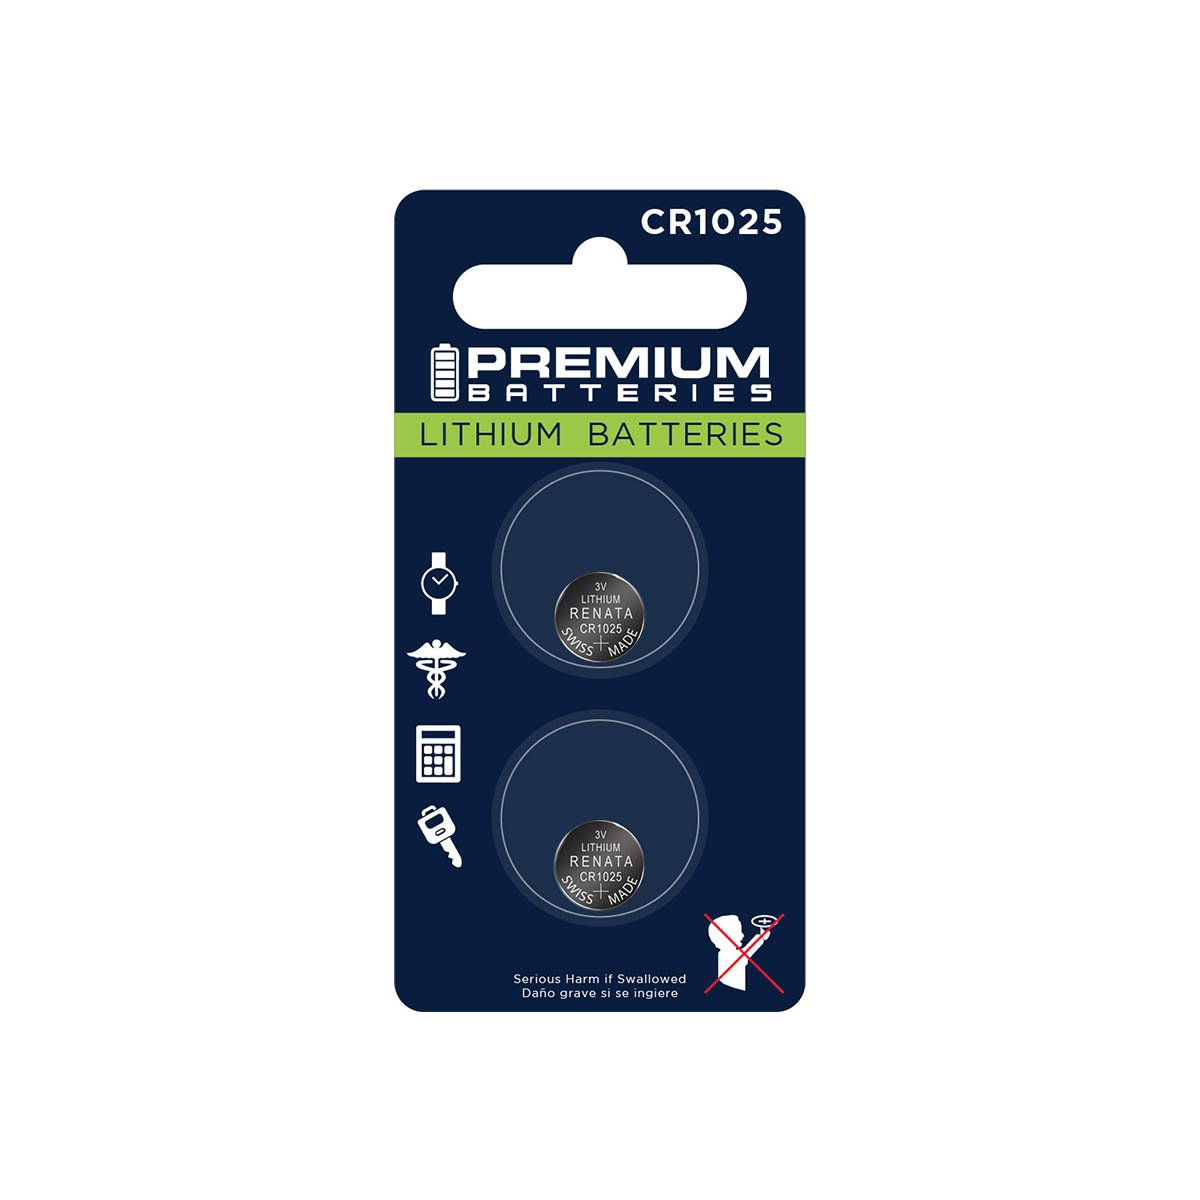 Premium Batteries CR1025 Battery 3V Lithium Coin Cell (2 Renata Batteries) (Child Resistant Packaging)